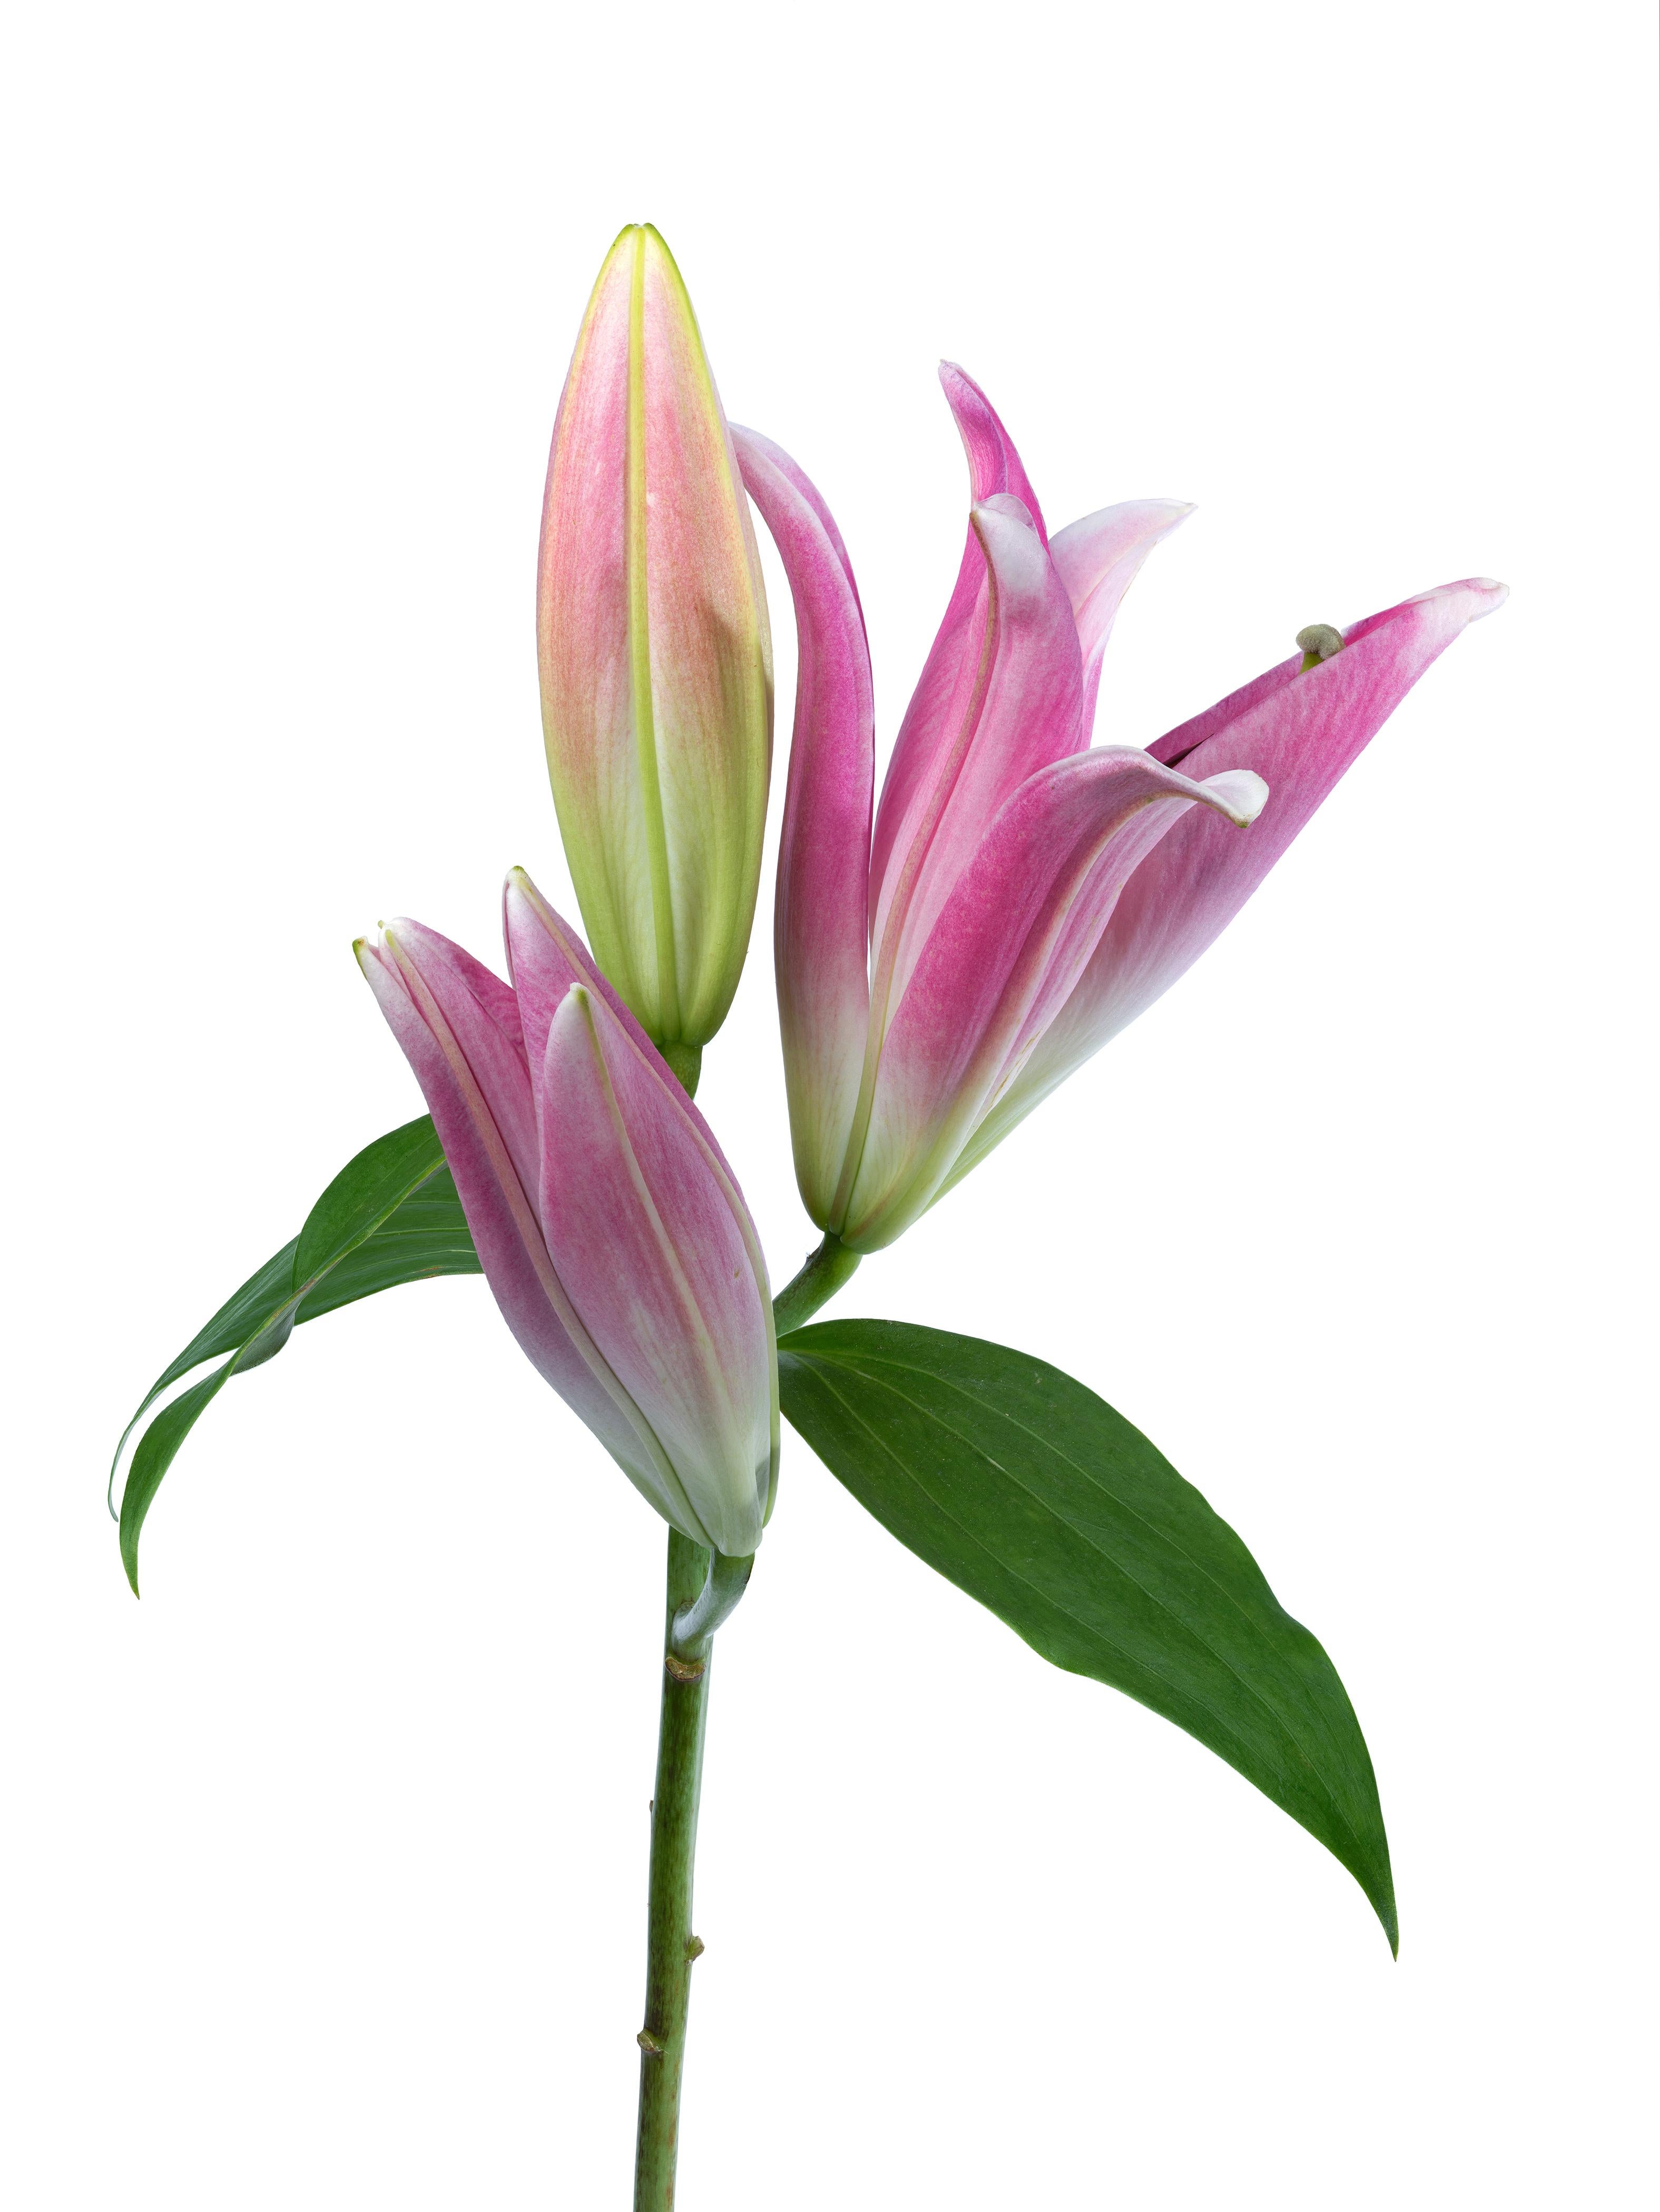 Lily 181 B, Color Photograph, Limited Edition, Pink, Framed, Botanical, Floral For Sale 1